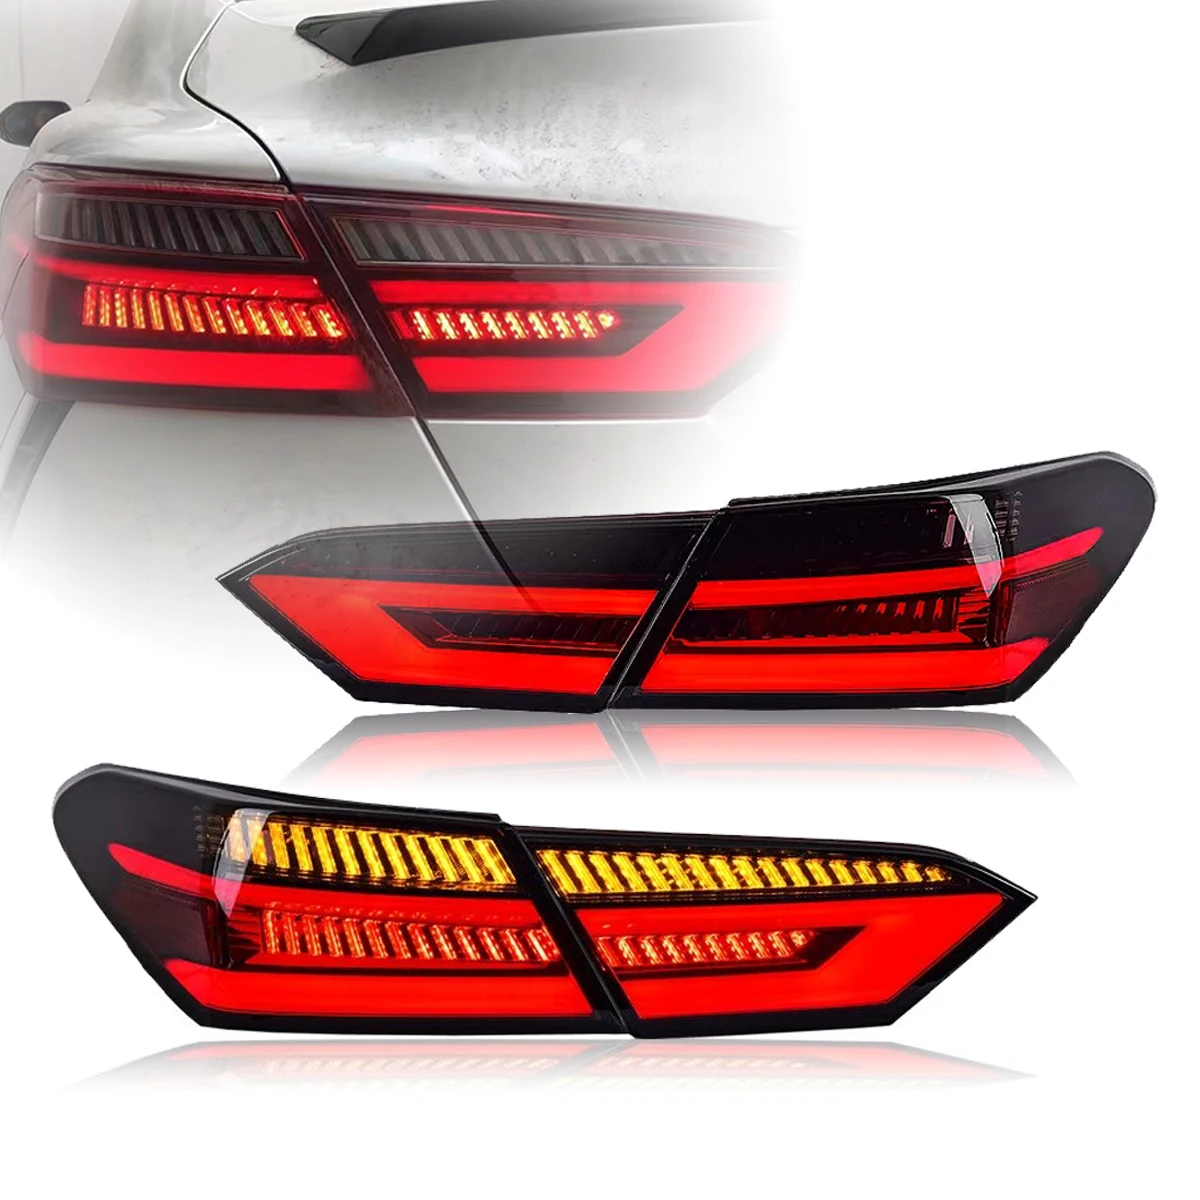 

Led Taillights Assembly Fit For Toyota Camry 8th Gen 2018-2022 Car Light Rear Tail Lamps Drl Start-up Dynamic Lights Turn Signal